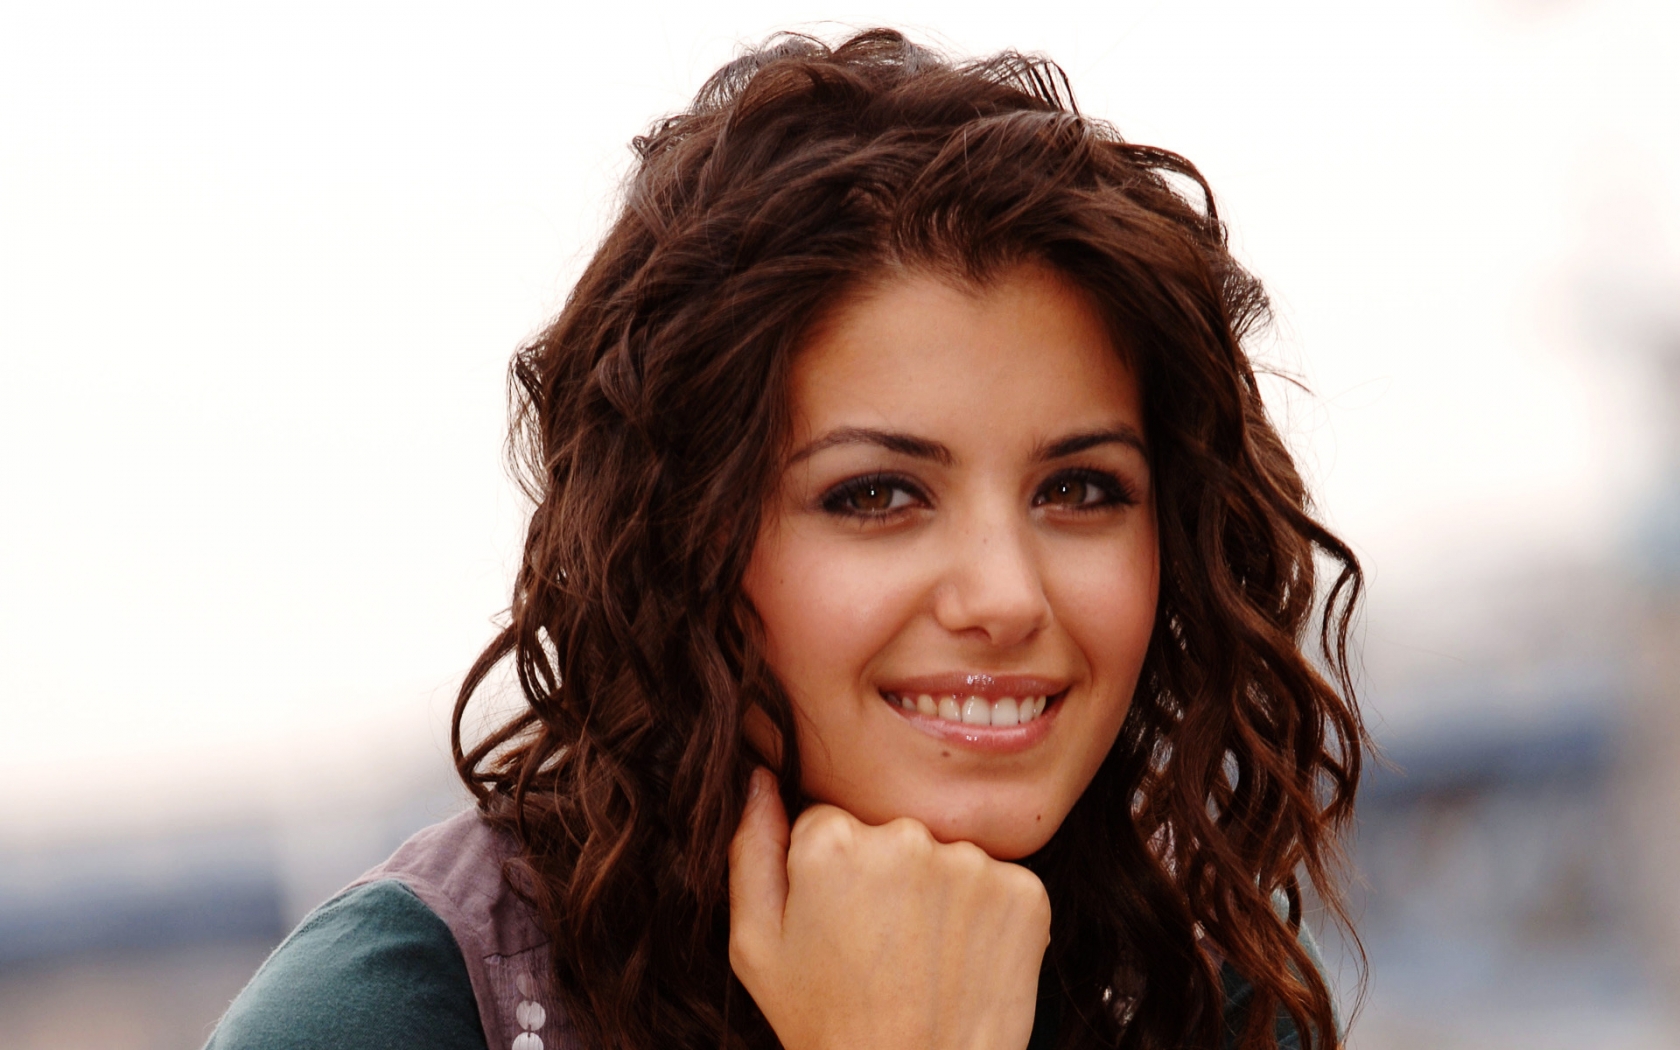 Katie Melua Smile for 1680 x 1050 widescreen resolution